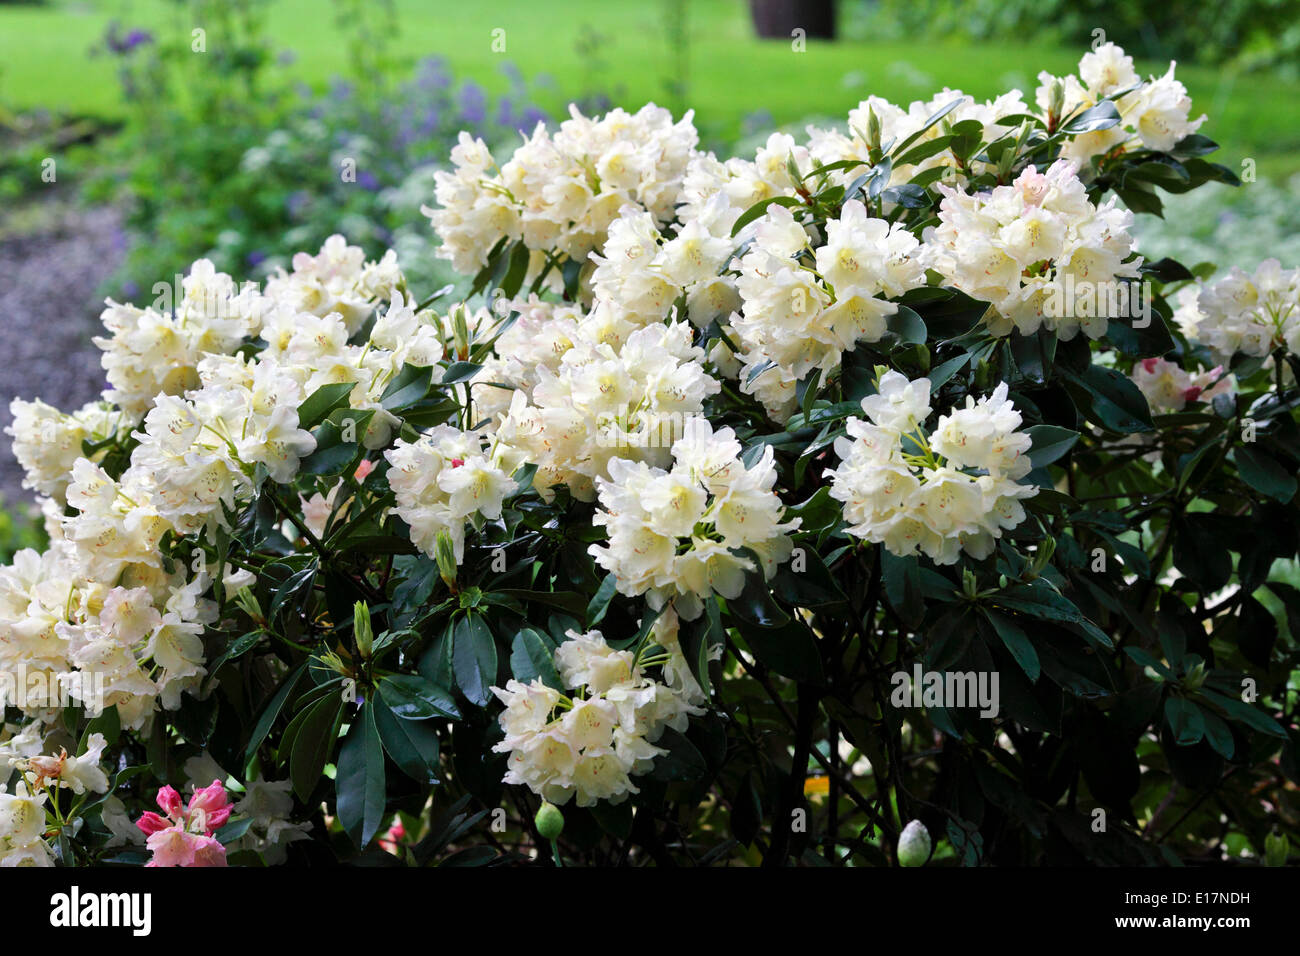 Spring display of creamy white Rhododendron blooms bathed in natural sunlight seen here in an English country garden. Stock Photo